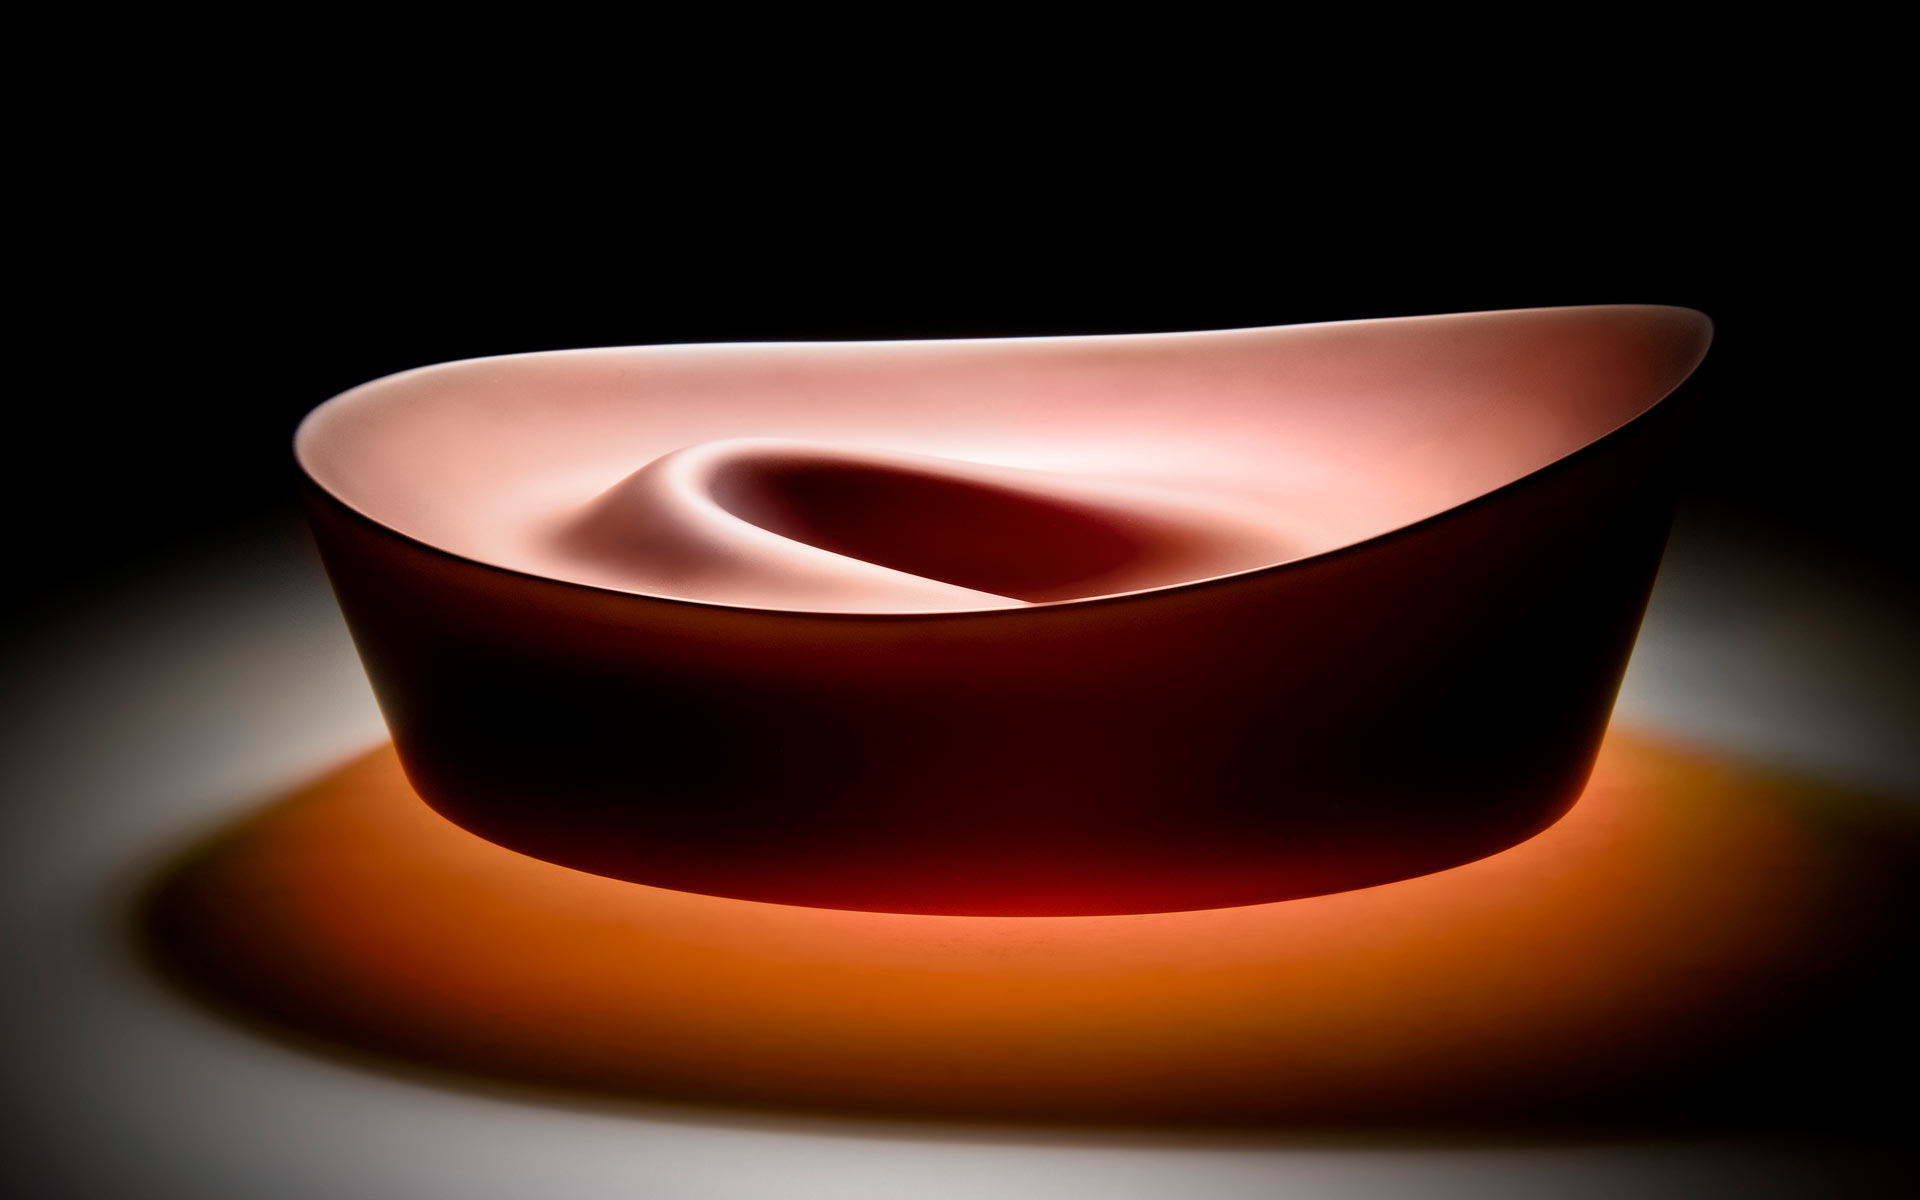 Ripple Series - Red Bowl Form